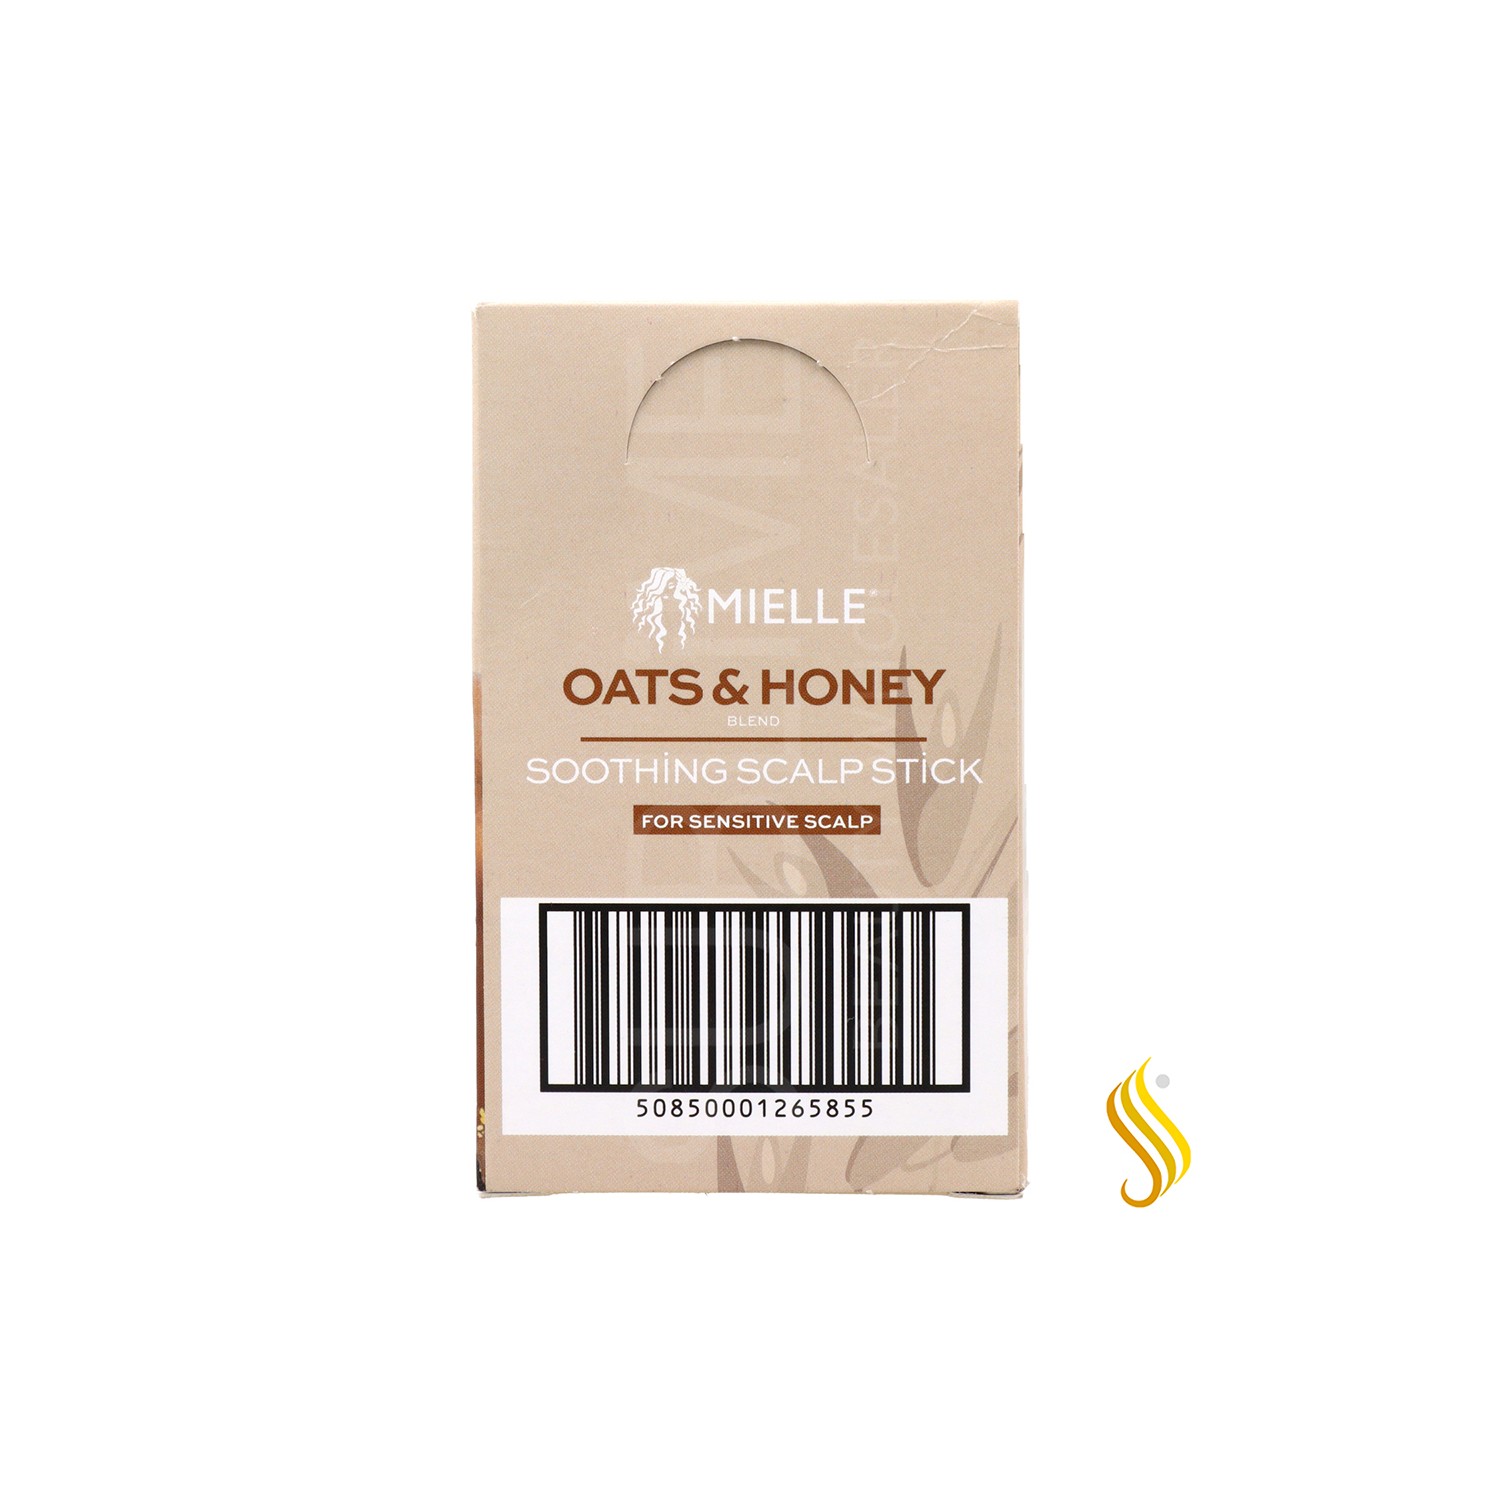 Mielle Oats Honey Soothing Scalp Stick pack 1 x 6 14 gr